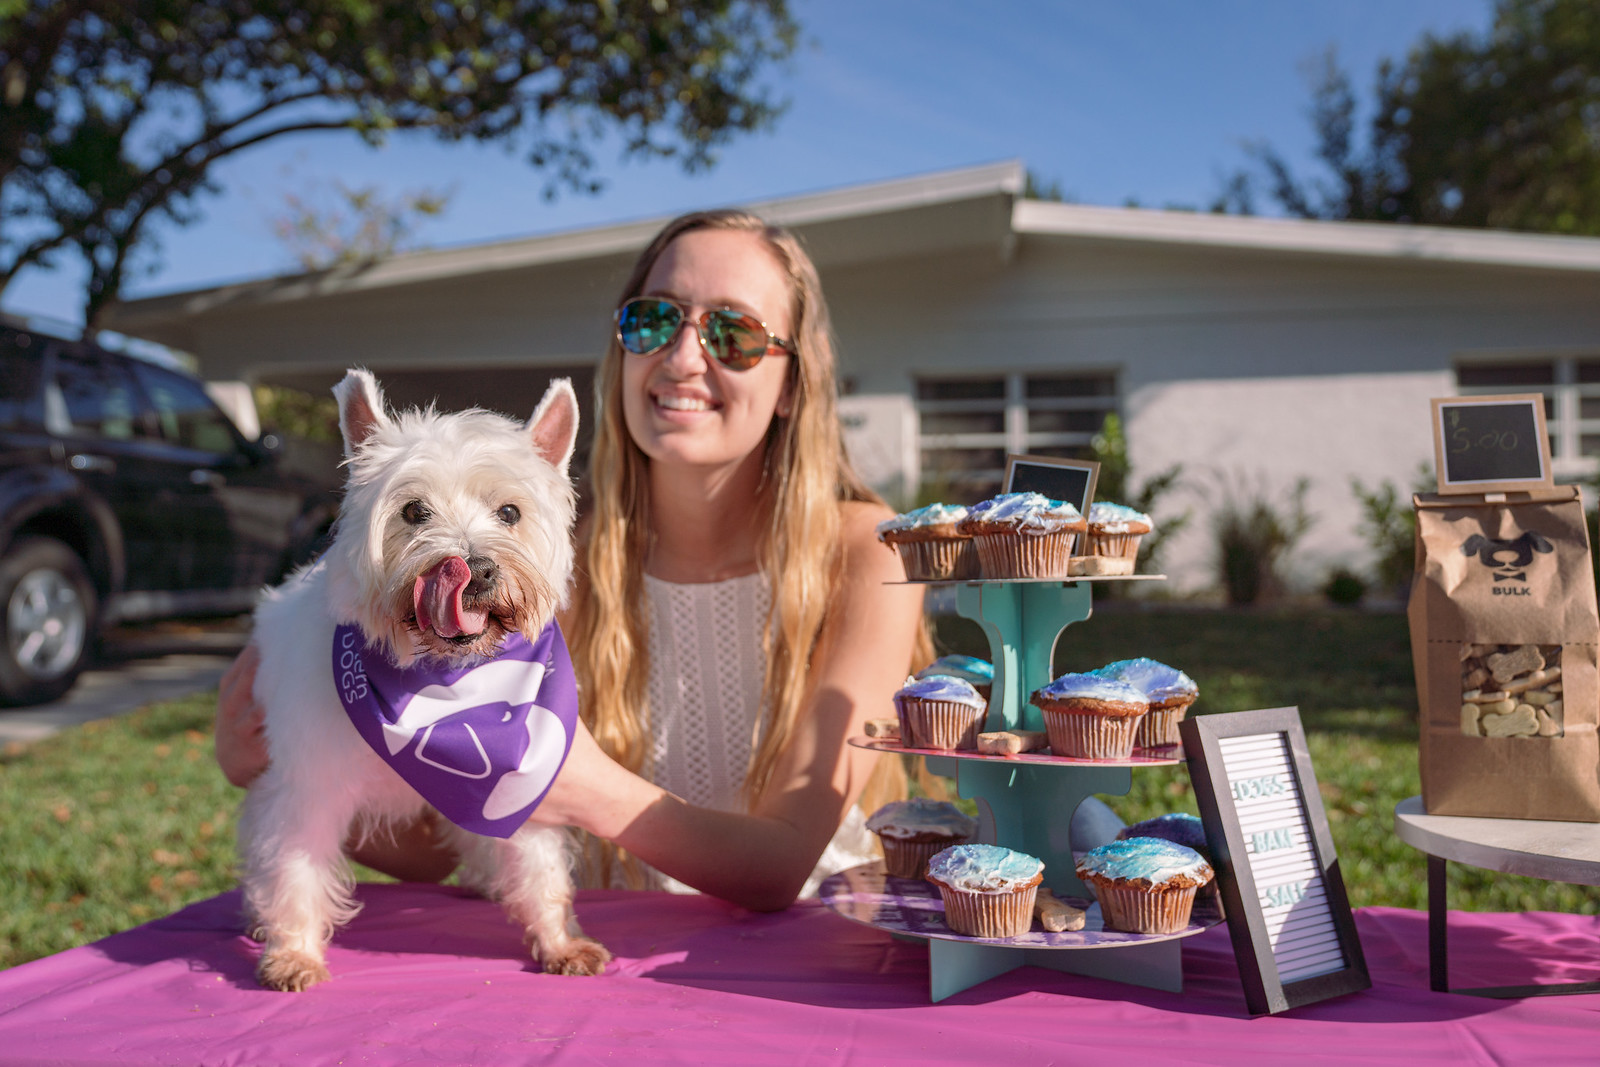 Girl smiles at camera while she holds a little white dog in purple walkathon bandana with cupcakes and dog treats to the right